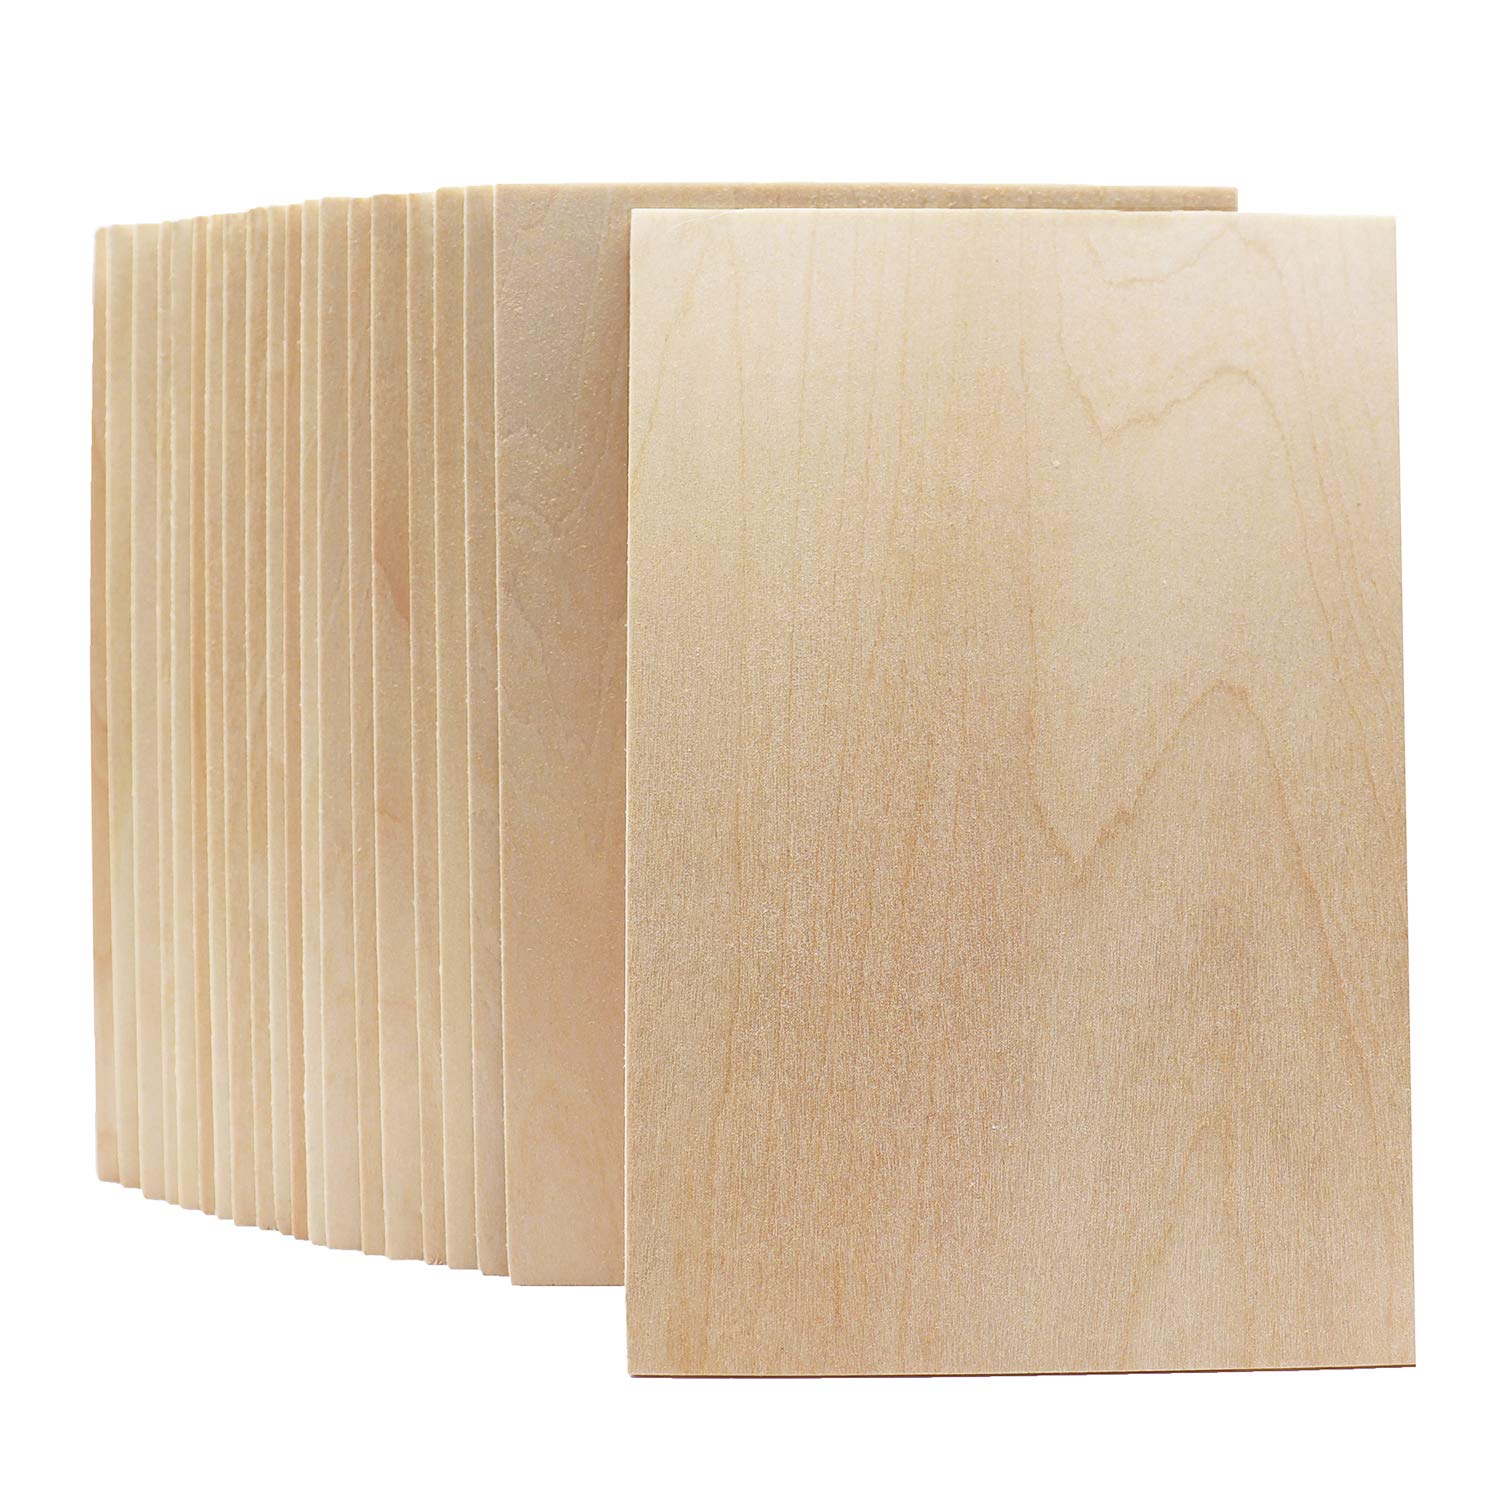 Karida Unfinished Wood Pieces,30Pcs Basswood Sheets 150X100X2mm 1/16,Thin  Plywood Wood Sheets for Crafts,Perfect for DIY Projects, Pain